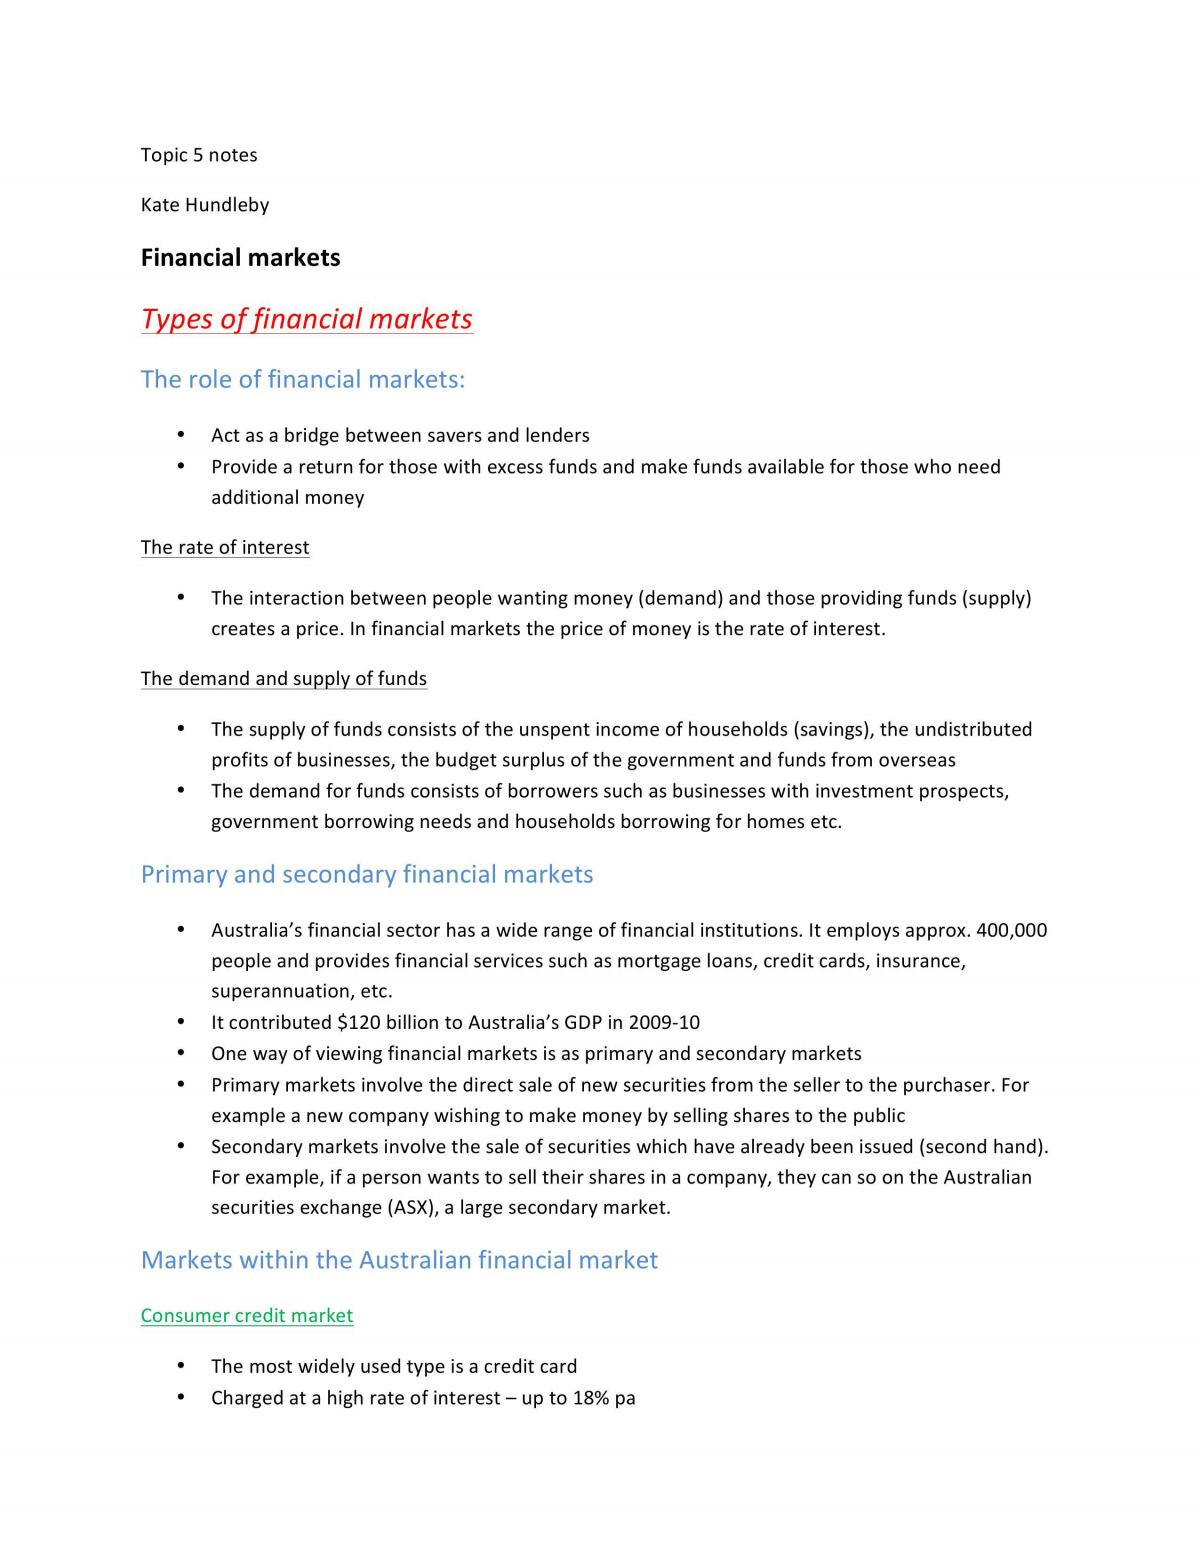 Topic 5: Financial markets notes - Page 1